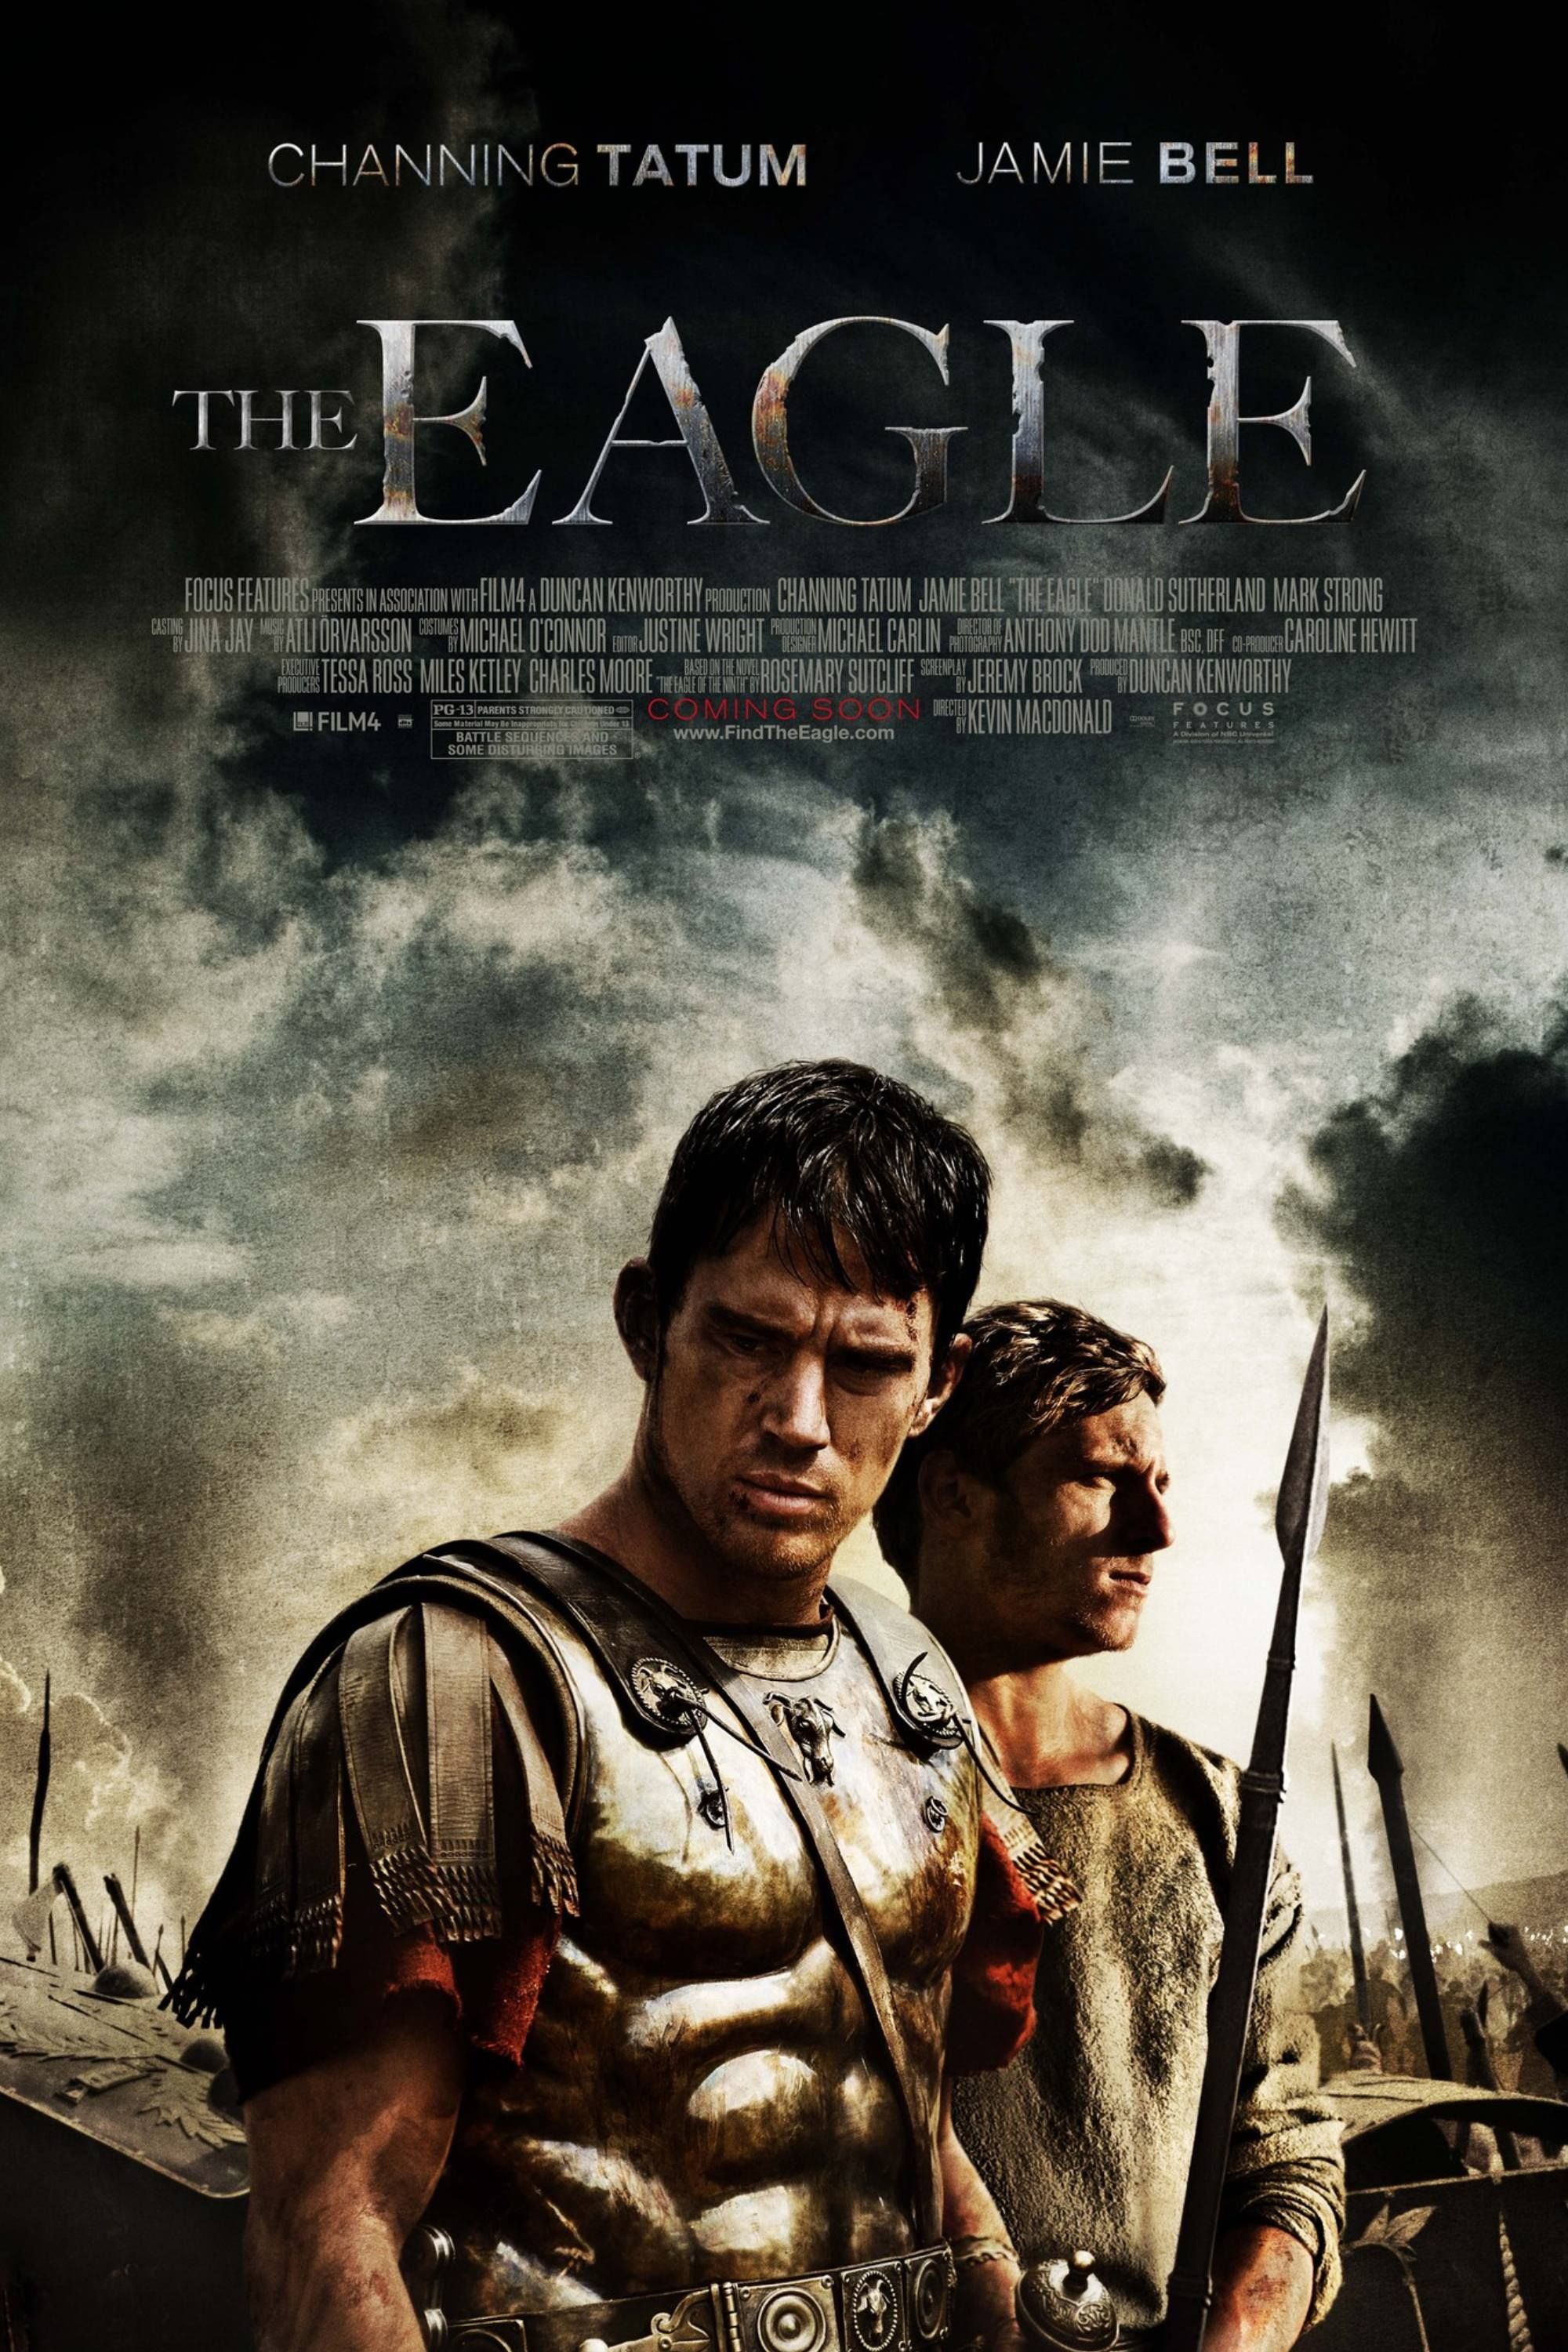 The Eagle - Poster - Channing Tatum & Jamie Bell With blood on them